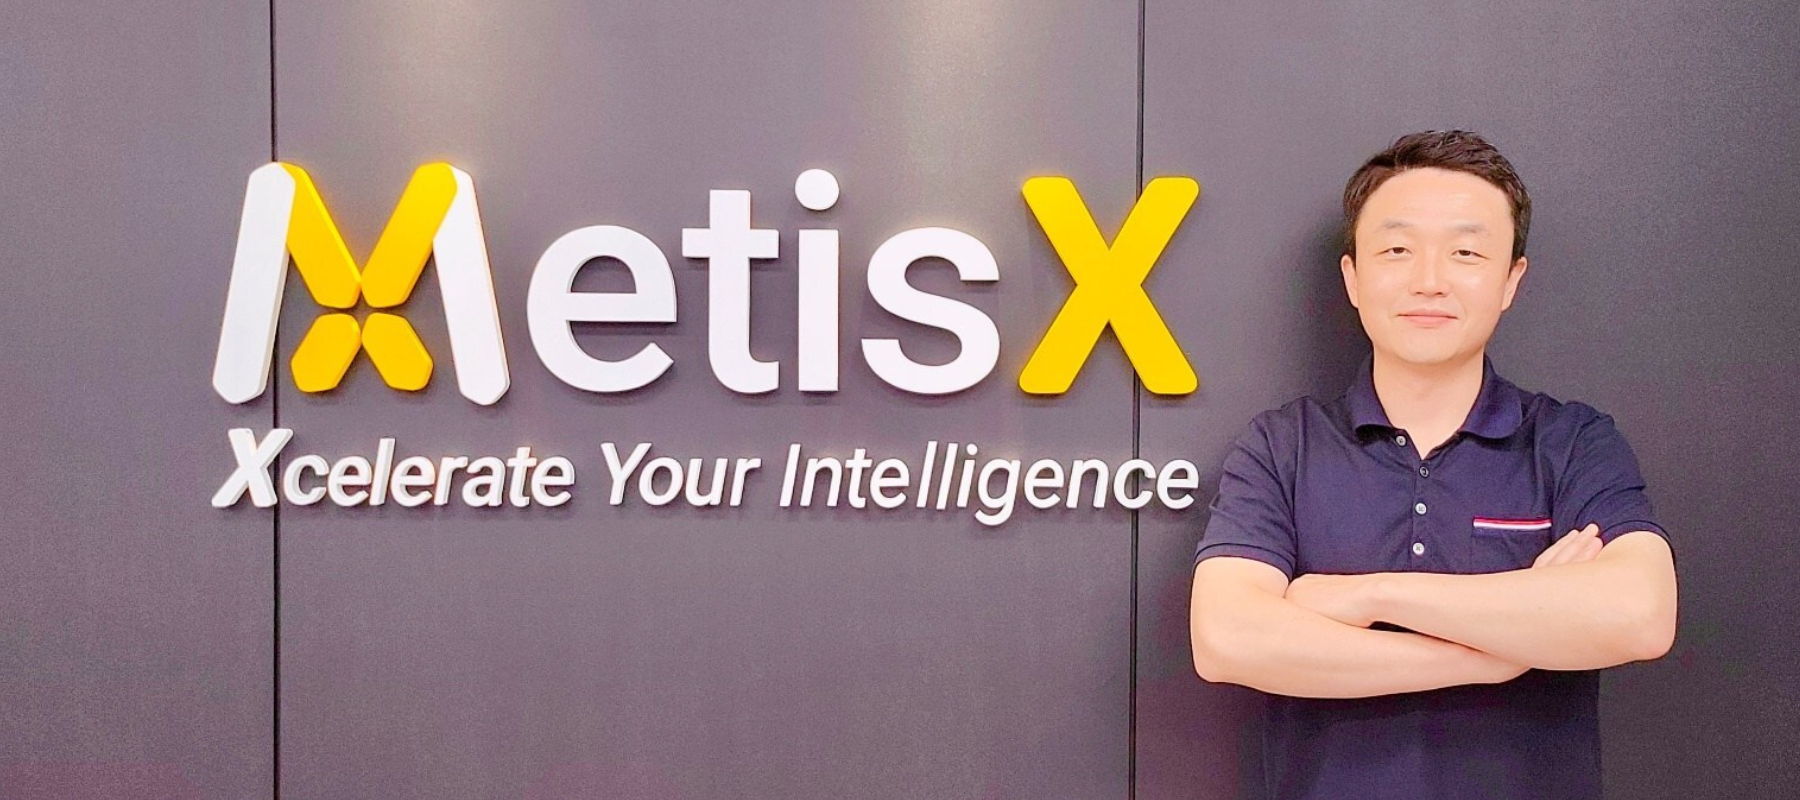 South Korean fabless startup MetisX raises $44m Series A funding to accelerate growth